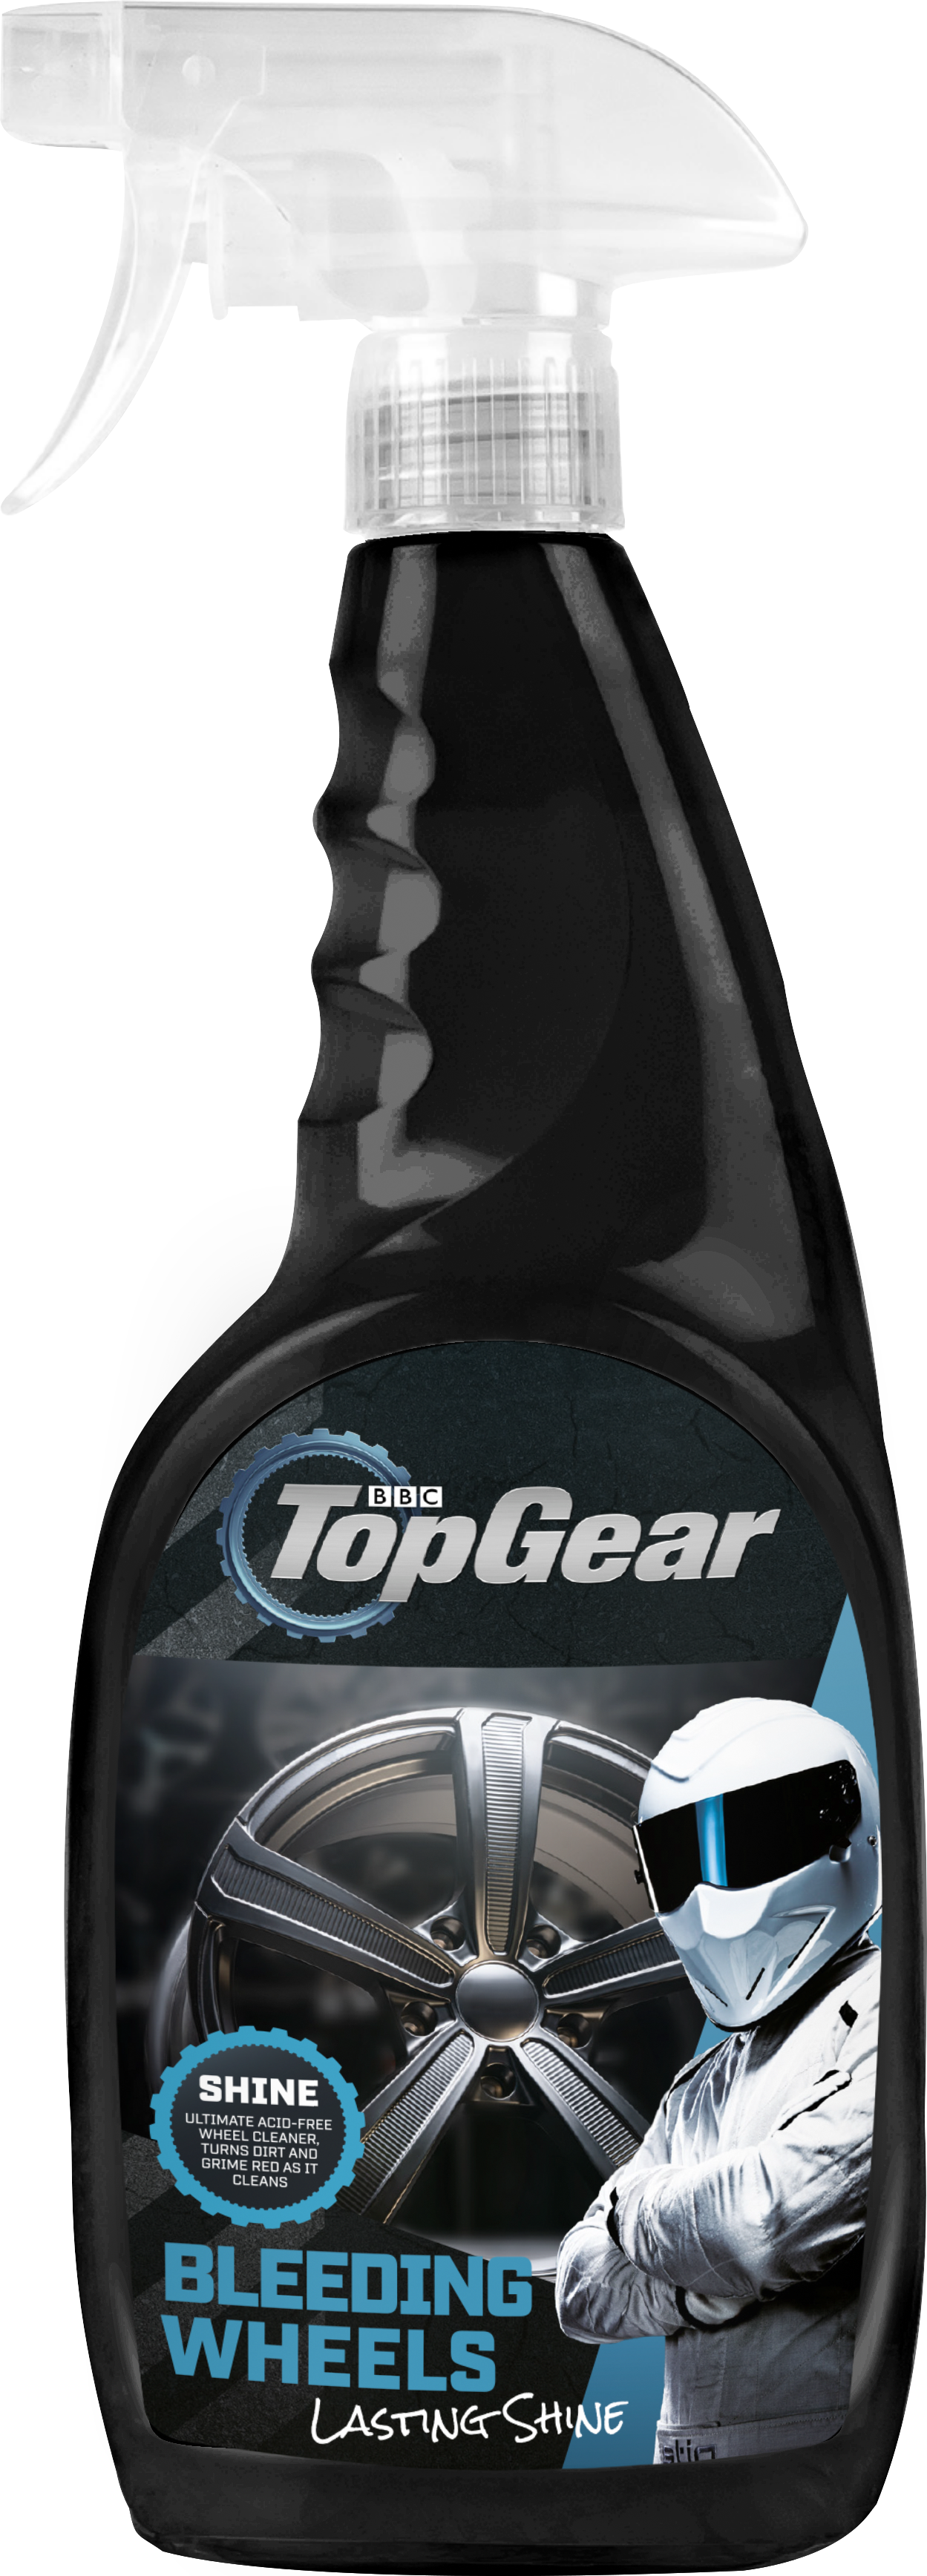 Top Gear - Air Fresheners 6 Pack Mixed Fragrance